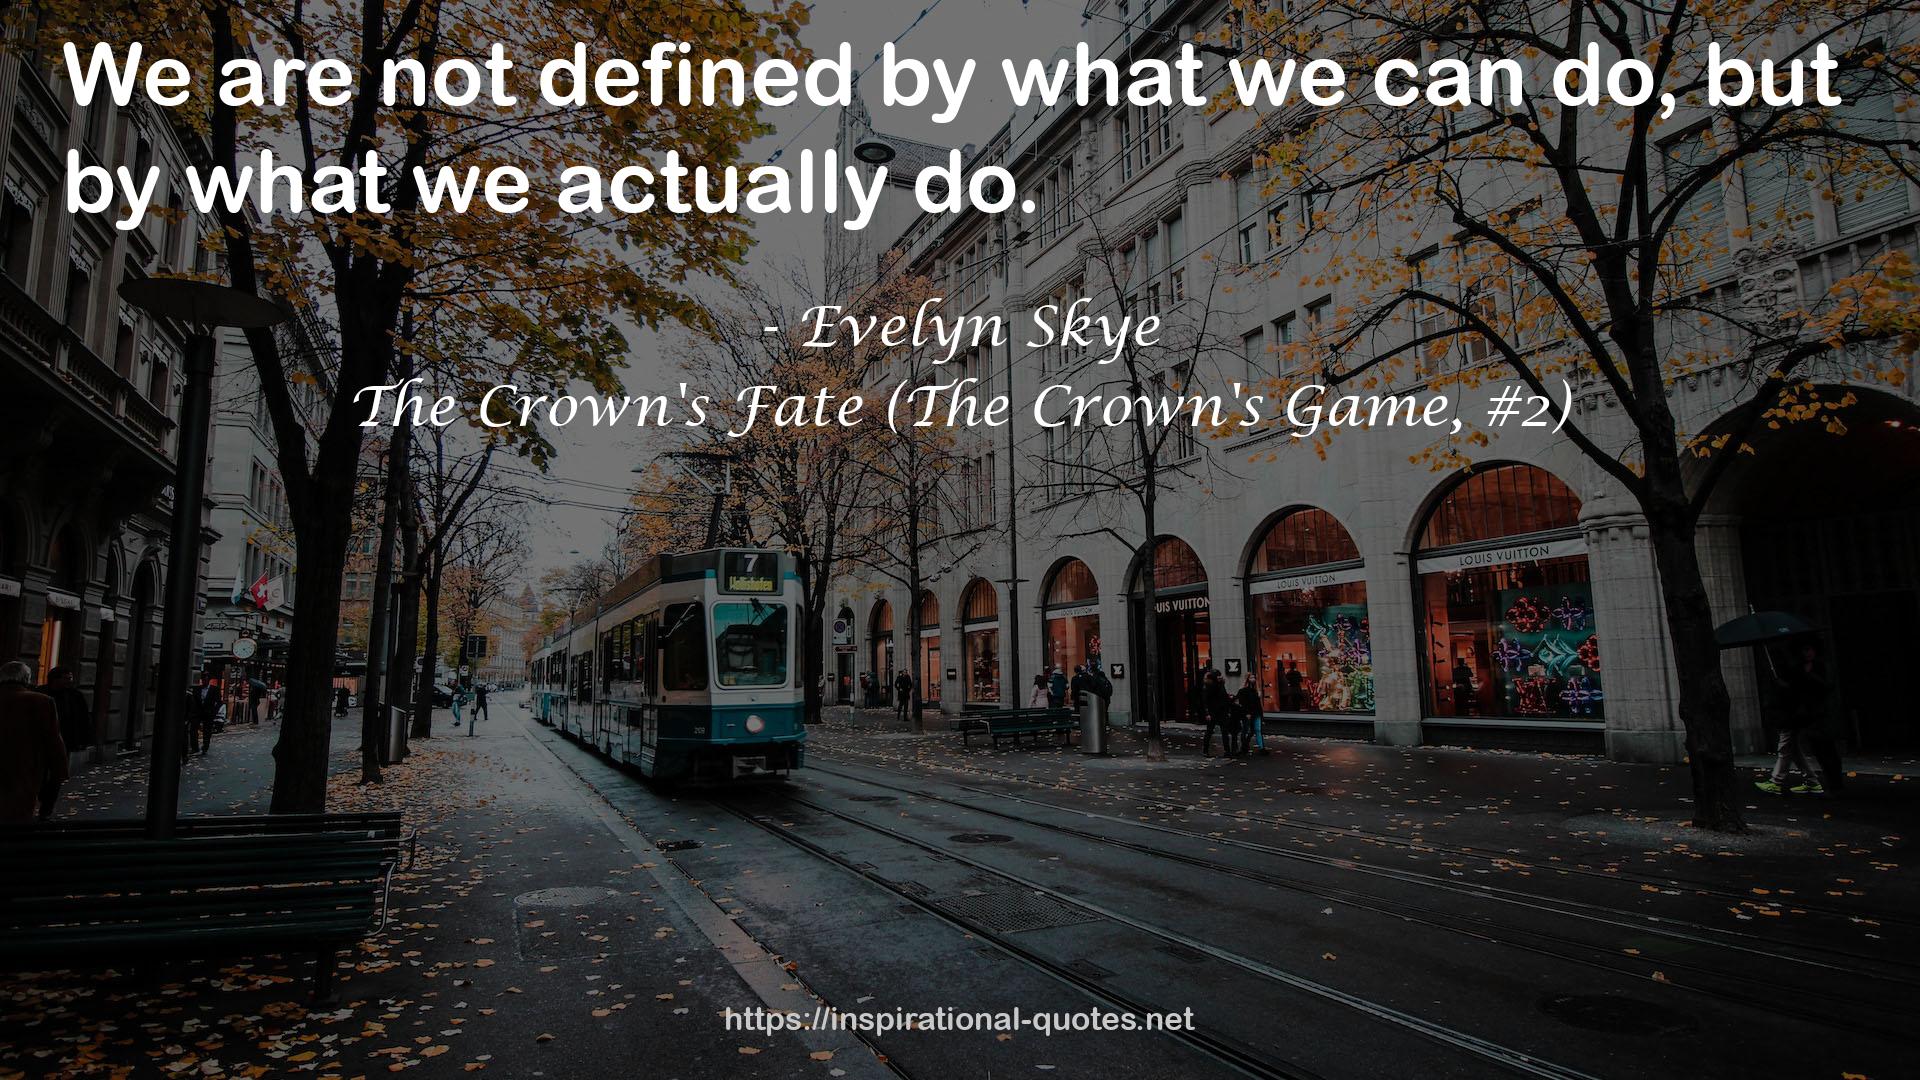 The Crown's Fate (The Crown's Game, #2) QUOTES